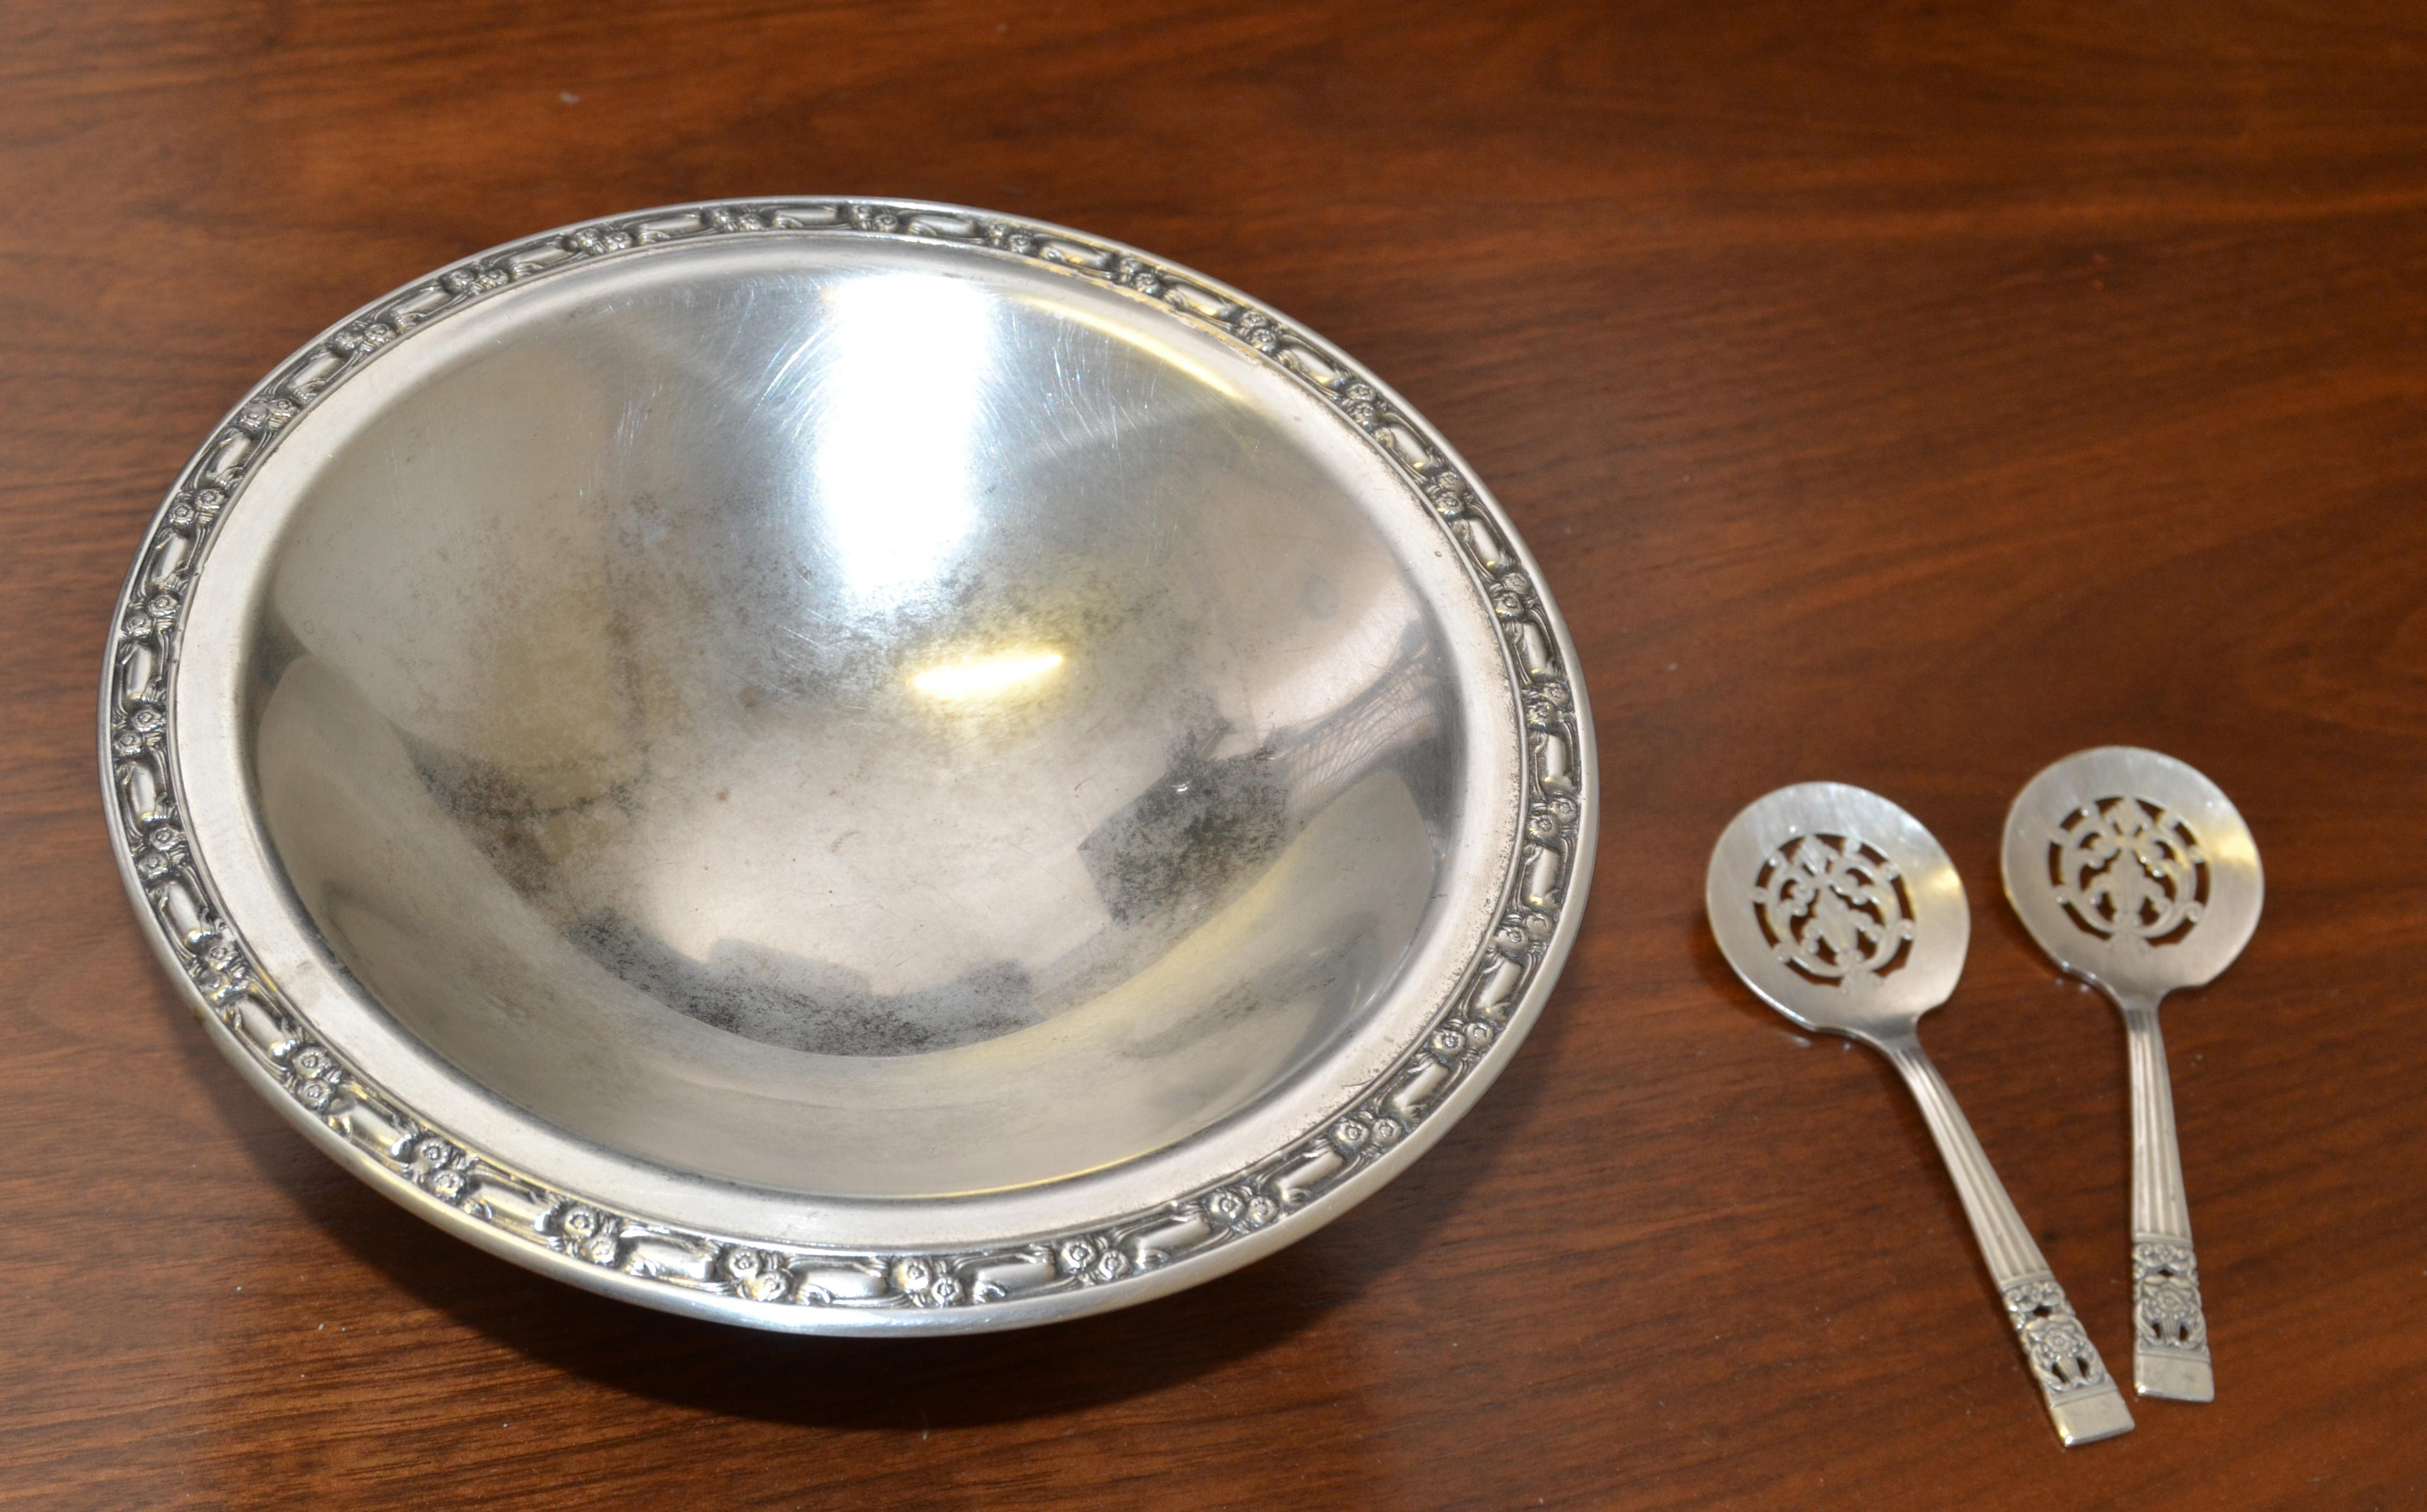 Victorian Ornate American lovely silverplate footed compote by Oneida Silversmiths. It comes with two Community Plate Spoons. The bowl itself is shallow and would be perfect for a base for a centerpiece or a fruit, cream dish, you let your